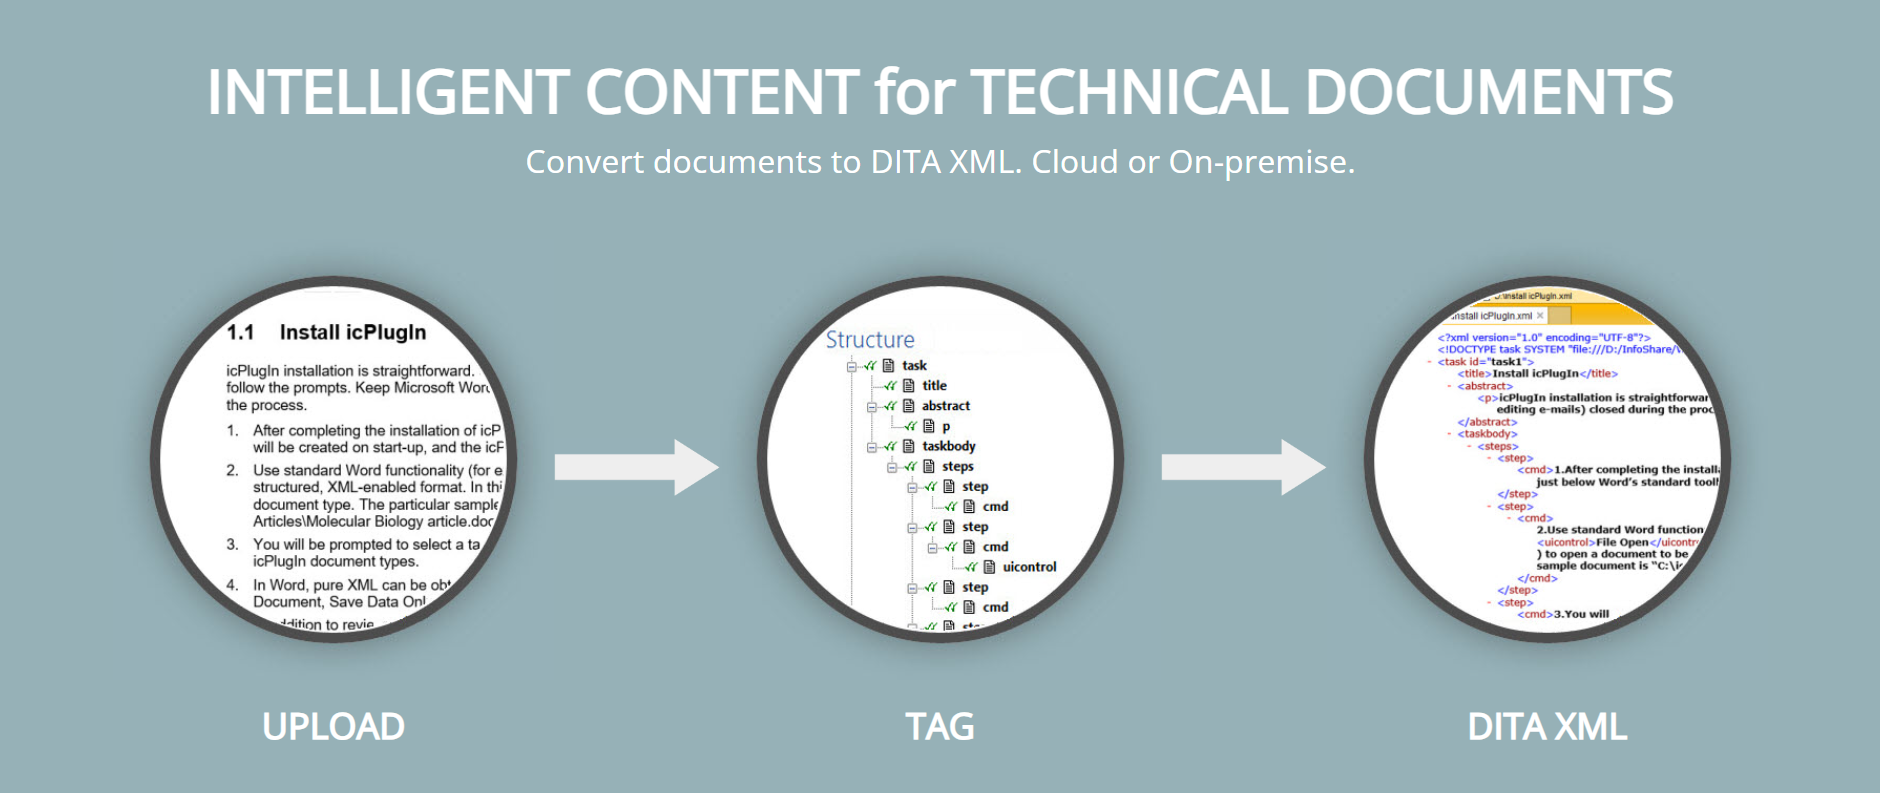 Intelligent Content Server for Technical Documents